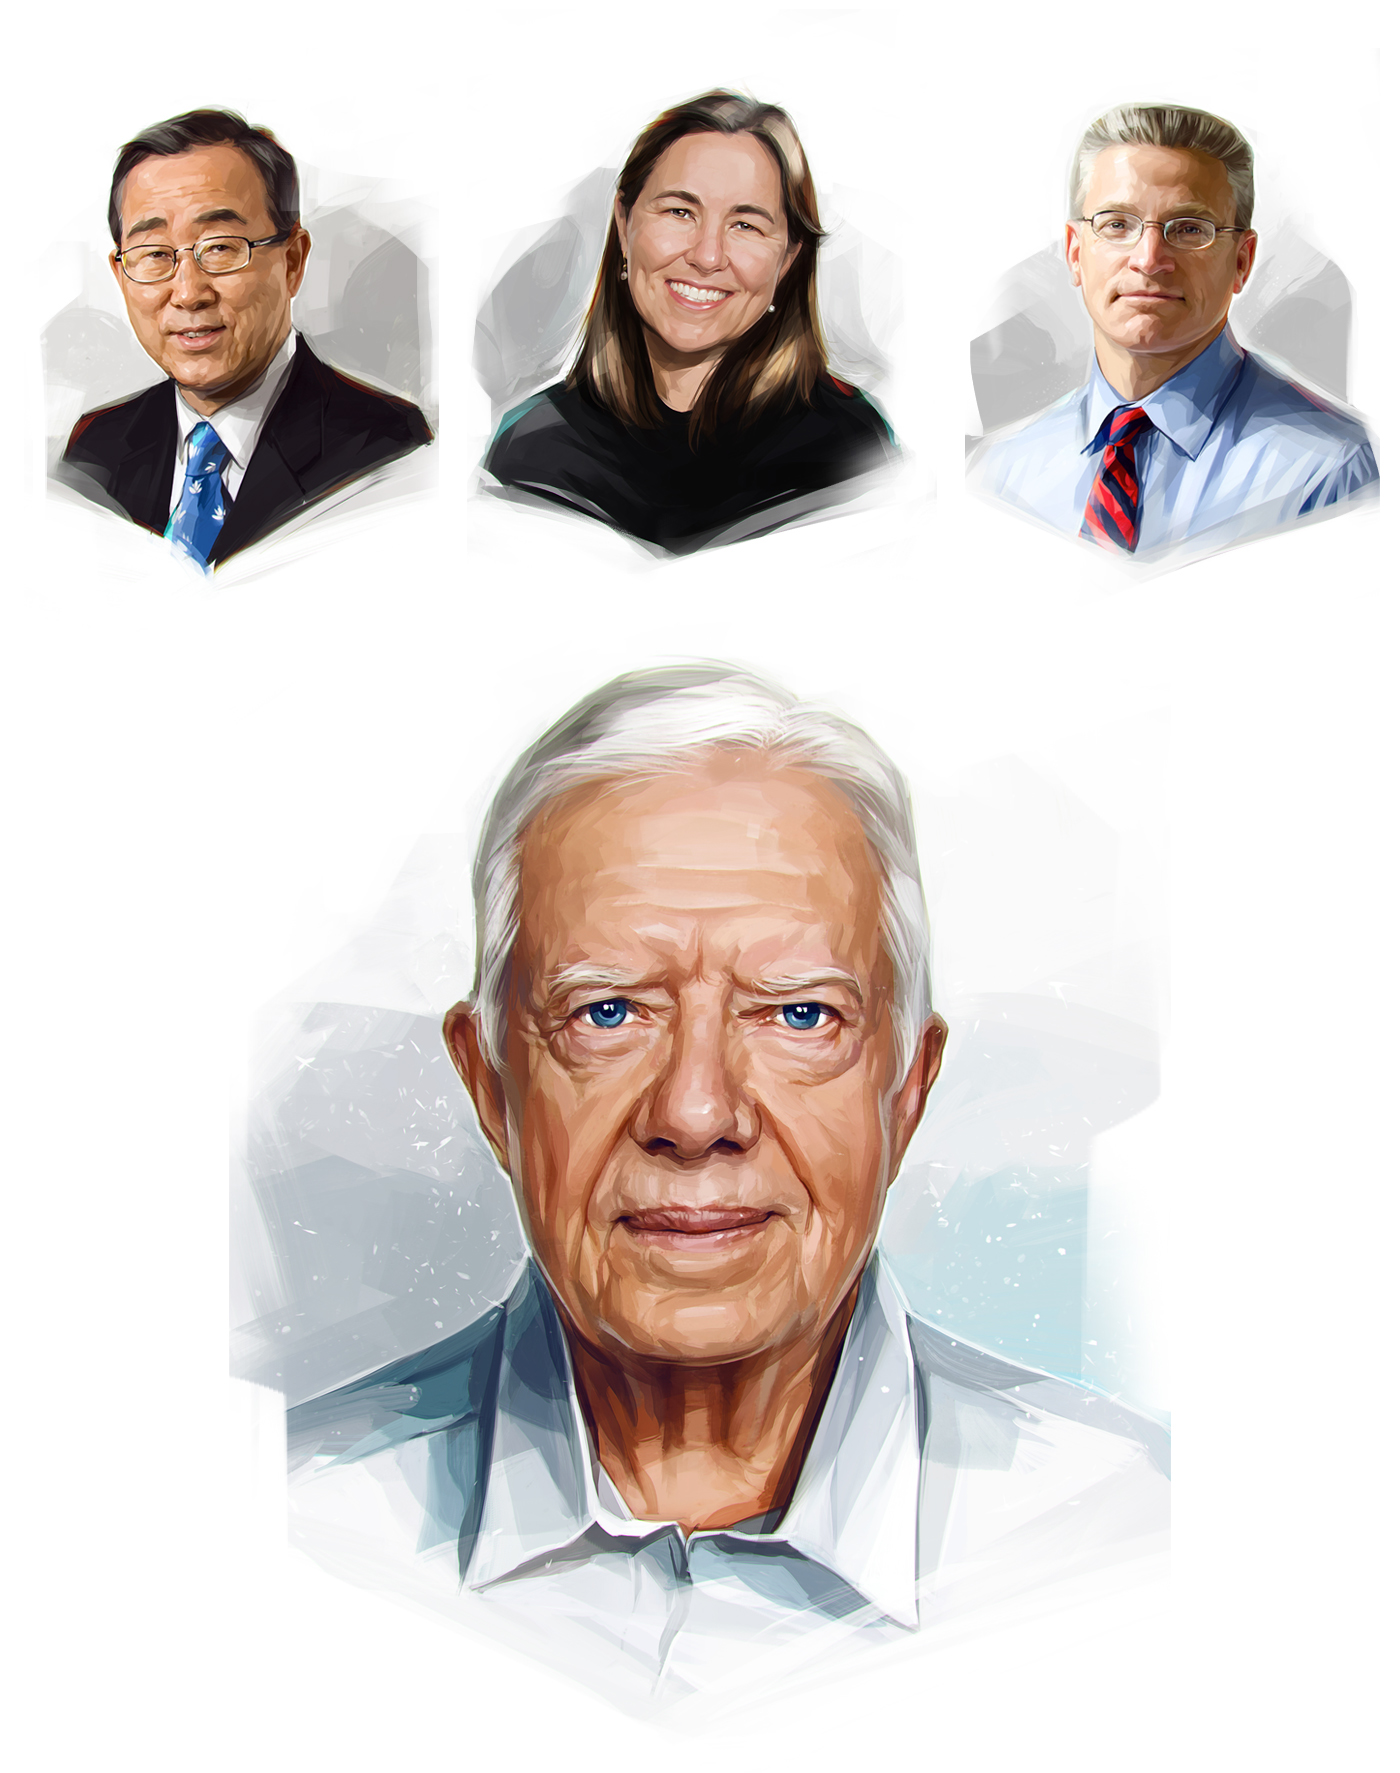 national geographic travelers people gastronomy police sport Jimmy Carter characters portrait world